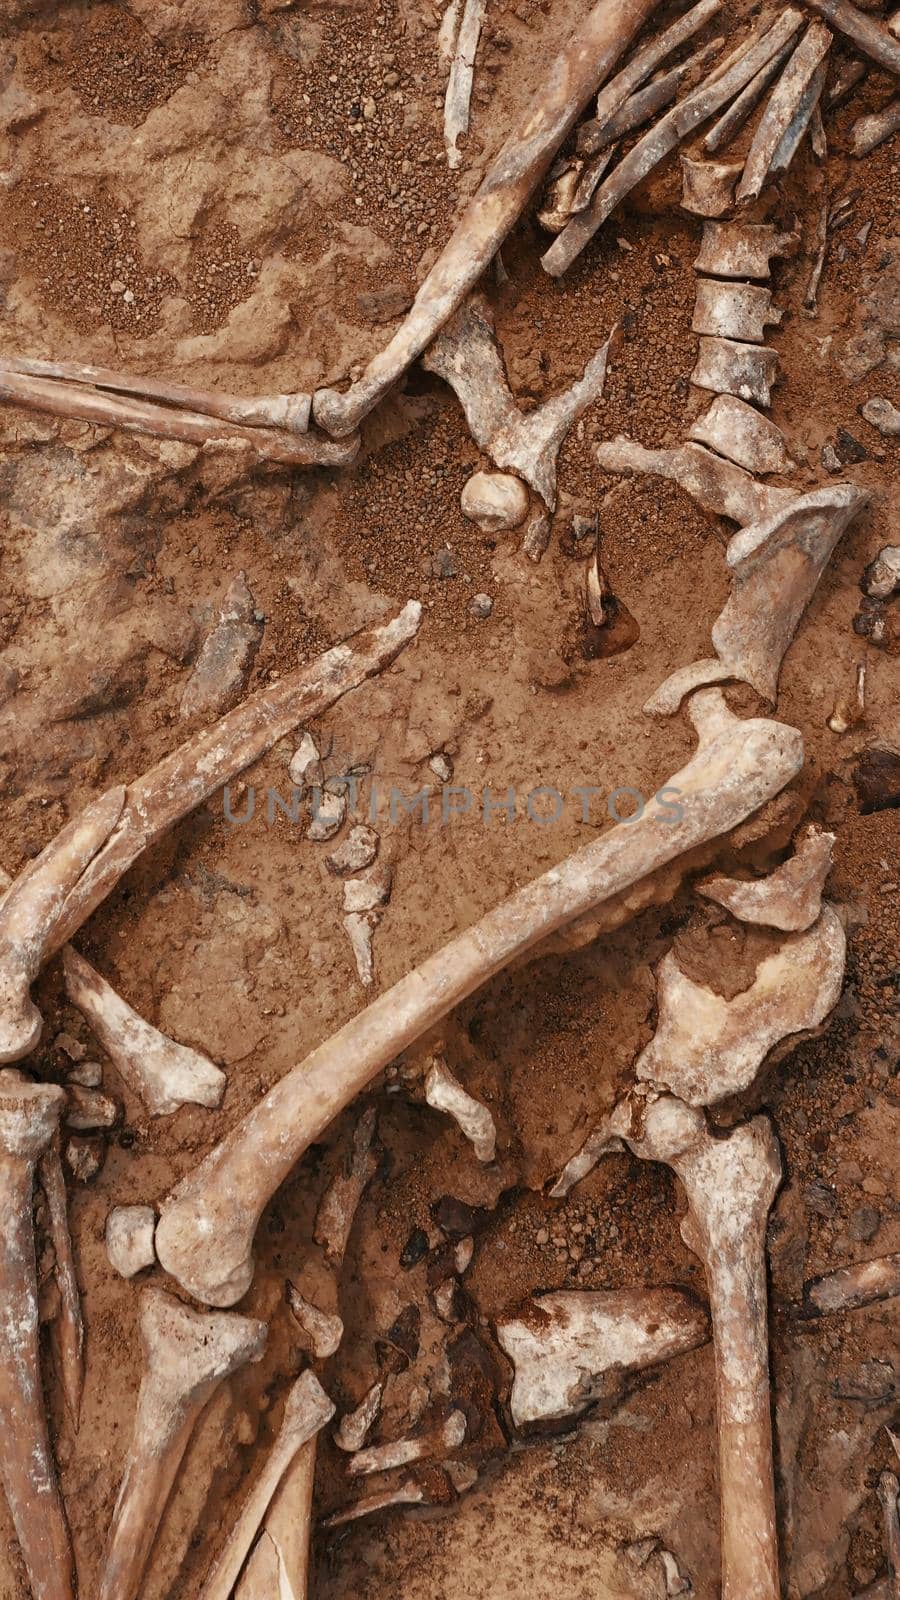 Archaeological excavations at the crime scene, Human remains in the ground. War crime scene. Site of a mass shooting of people. Human remains - bones of skeleton, skulls.